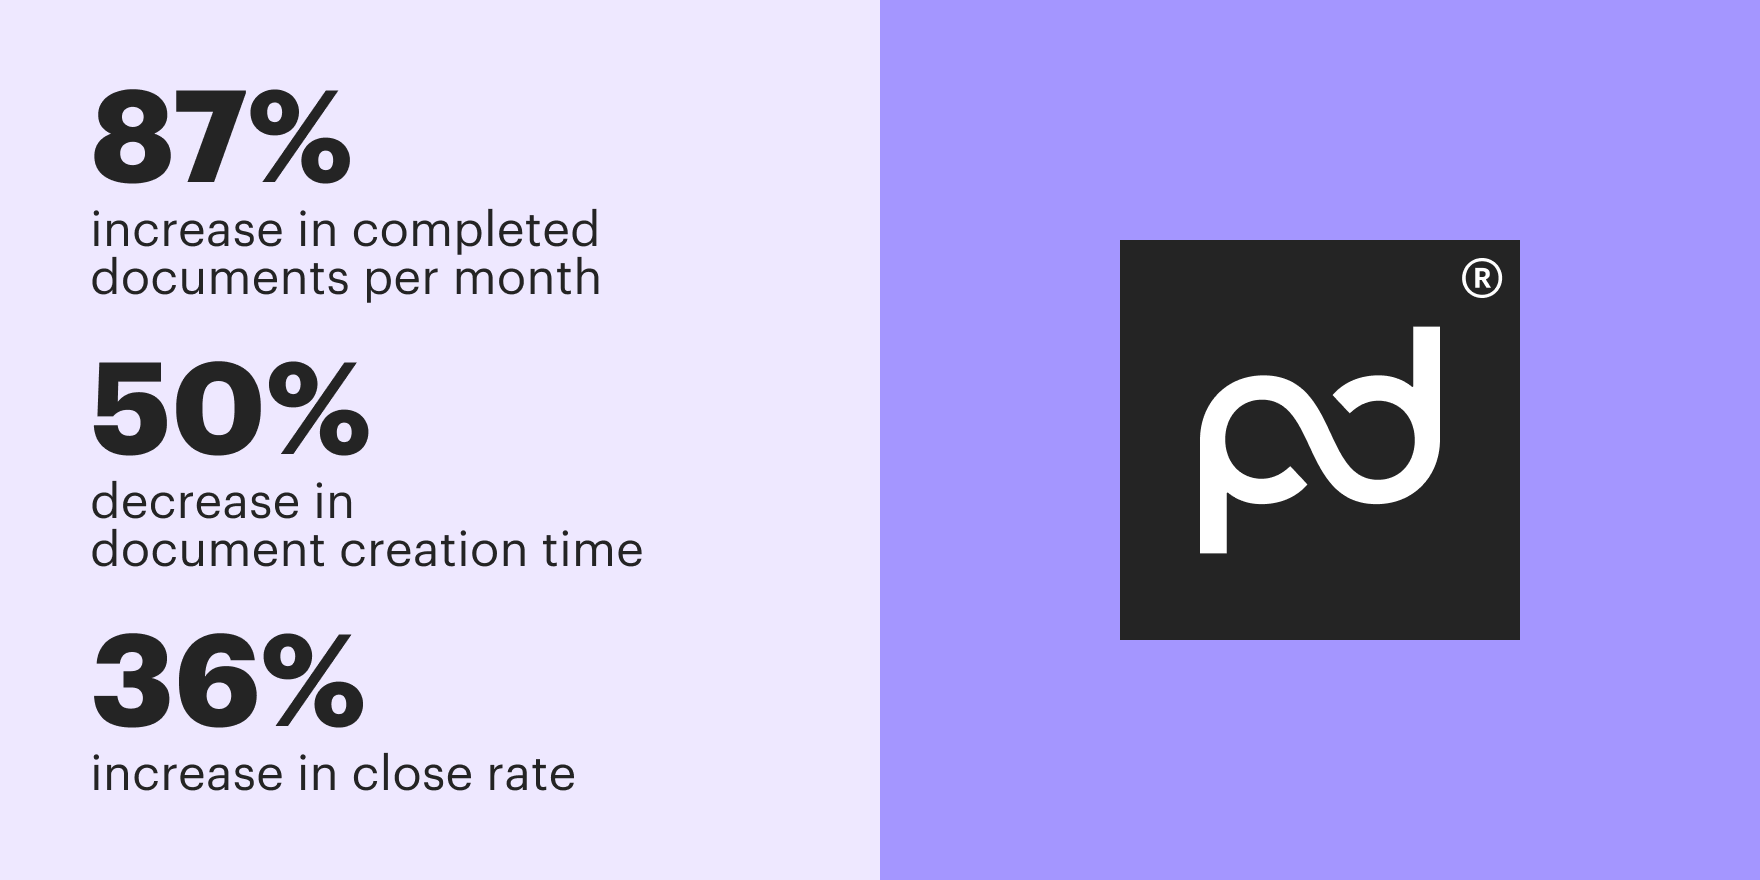 A banner showing performance improvement metrics when using PandaDoc: 87% increase in completed documents; 50% decrease in document creation time; 36% increase in close rate.